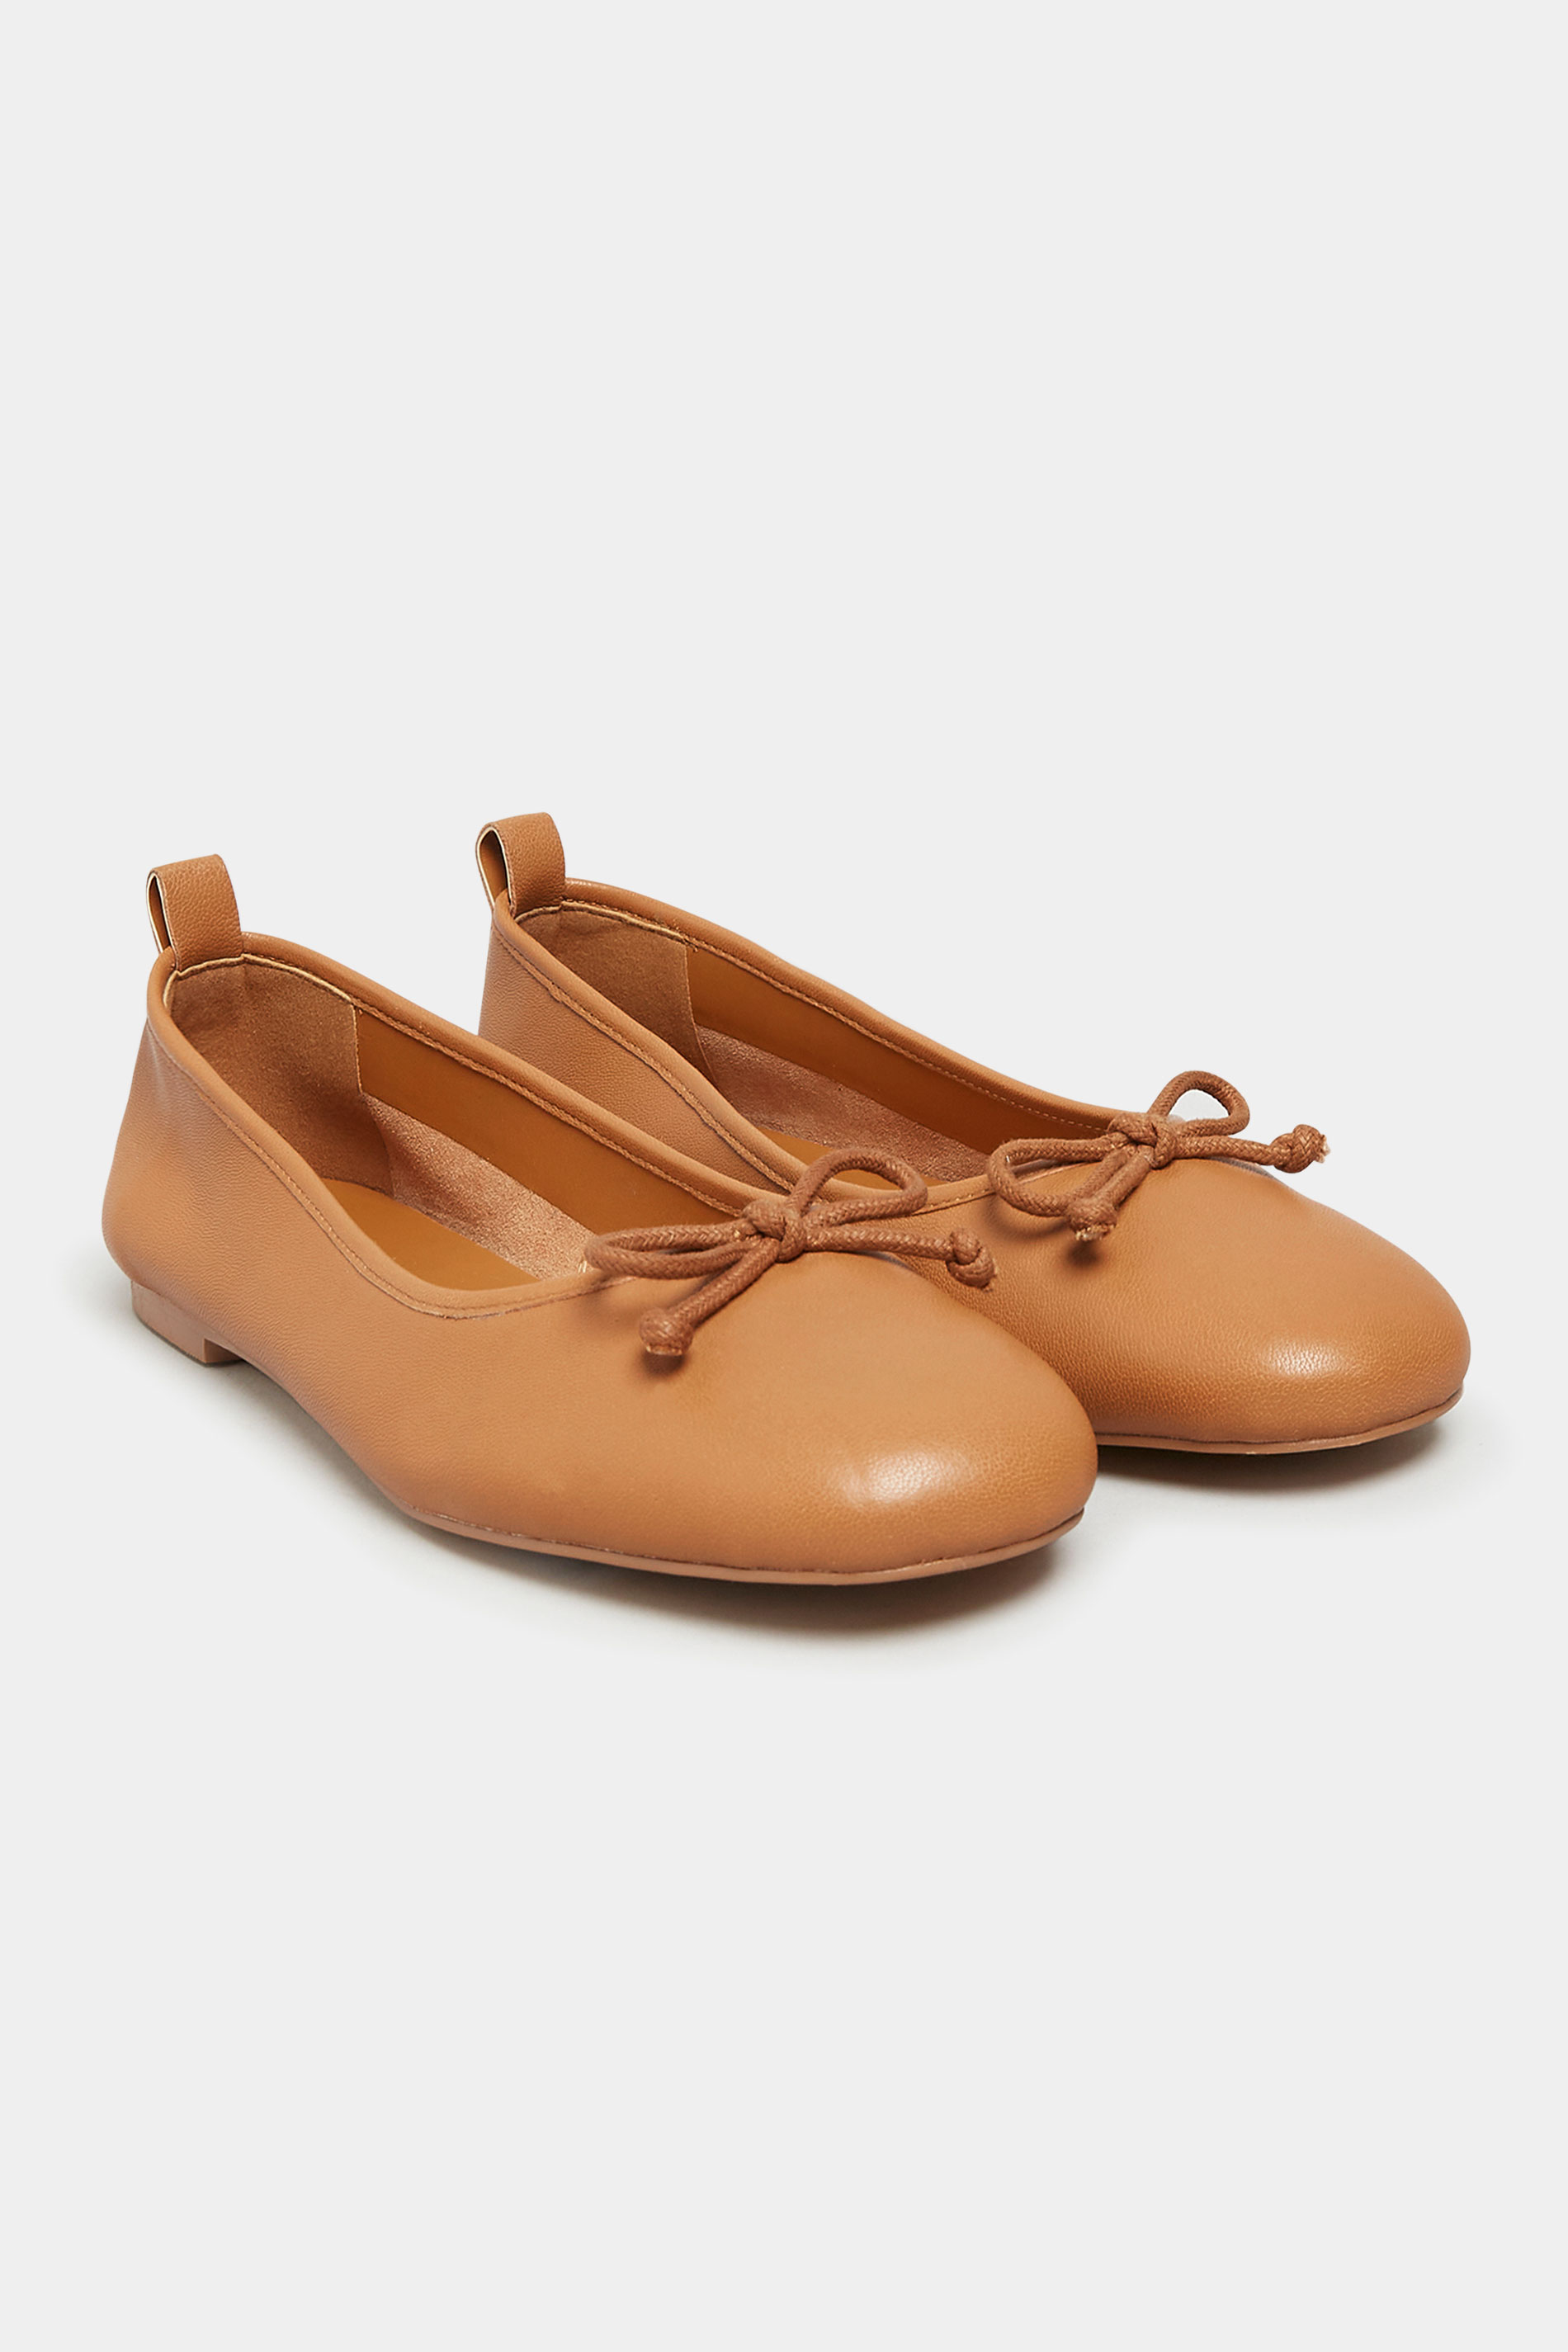 LTS Brown Leather Ballerina Pumps In Standard Fit | Long Tall Sally 2